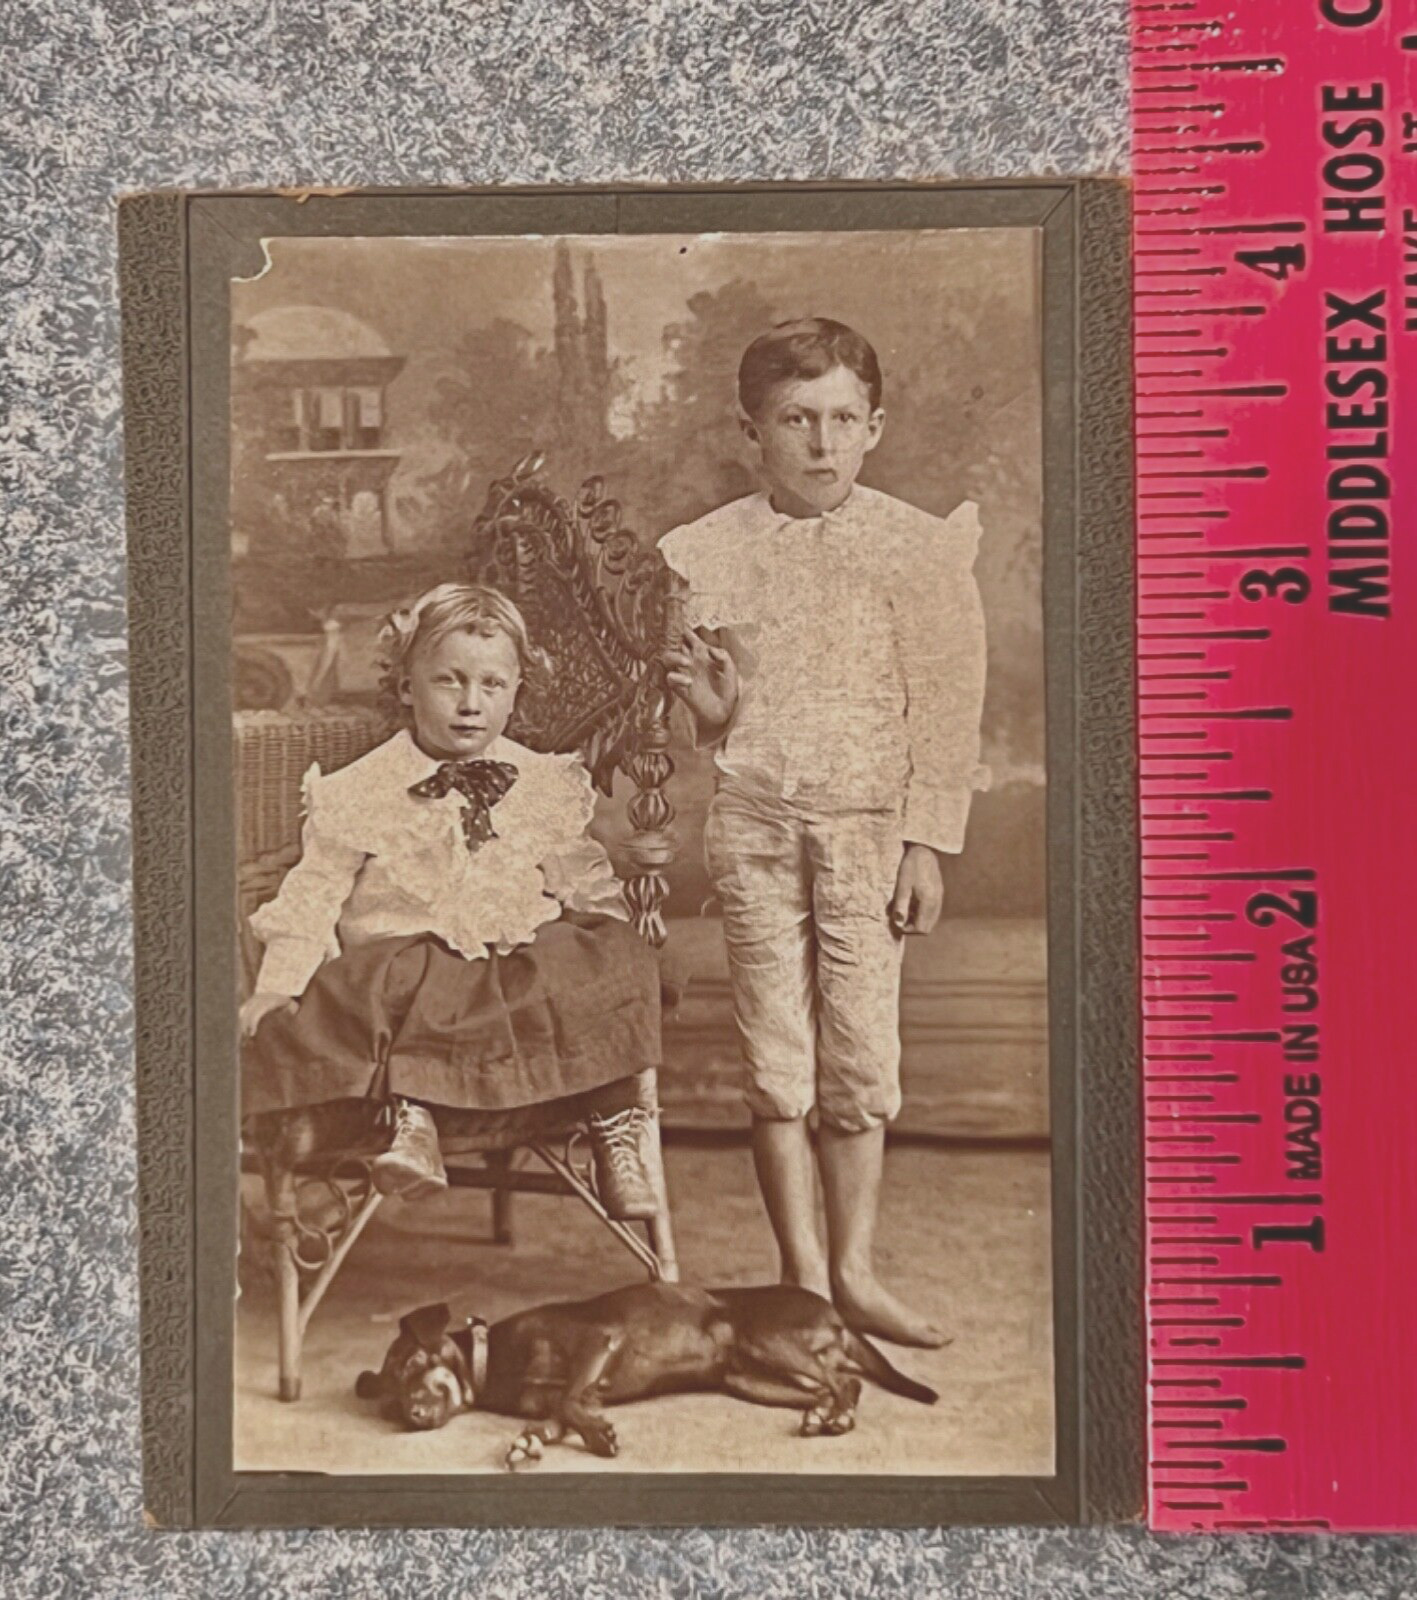 Antique Photo Fancy Clothes Barefoot Boy,Toddler, Dog Italy? Sepia 4x3” Mounted